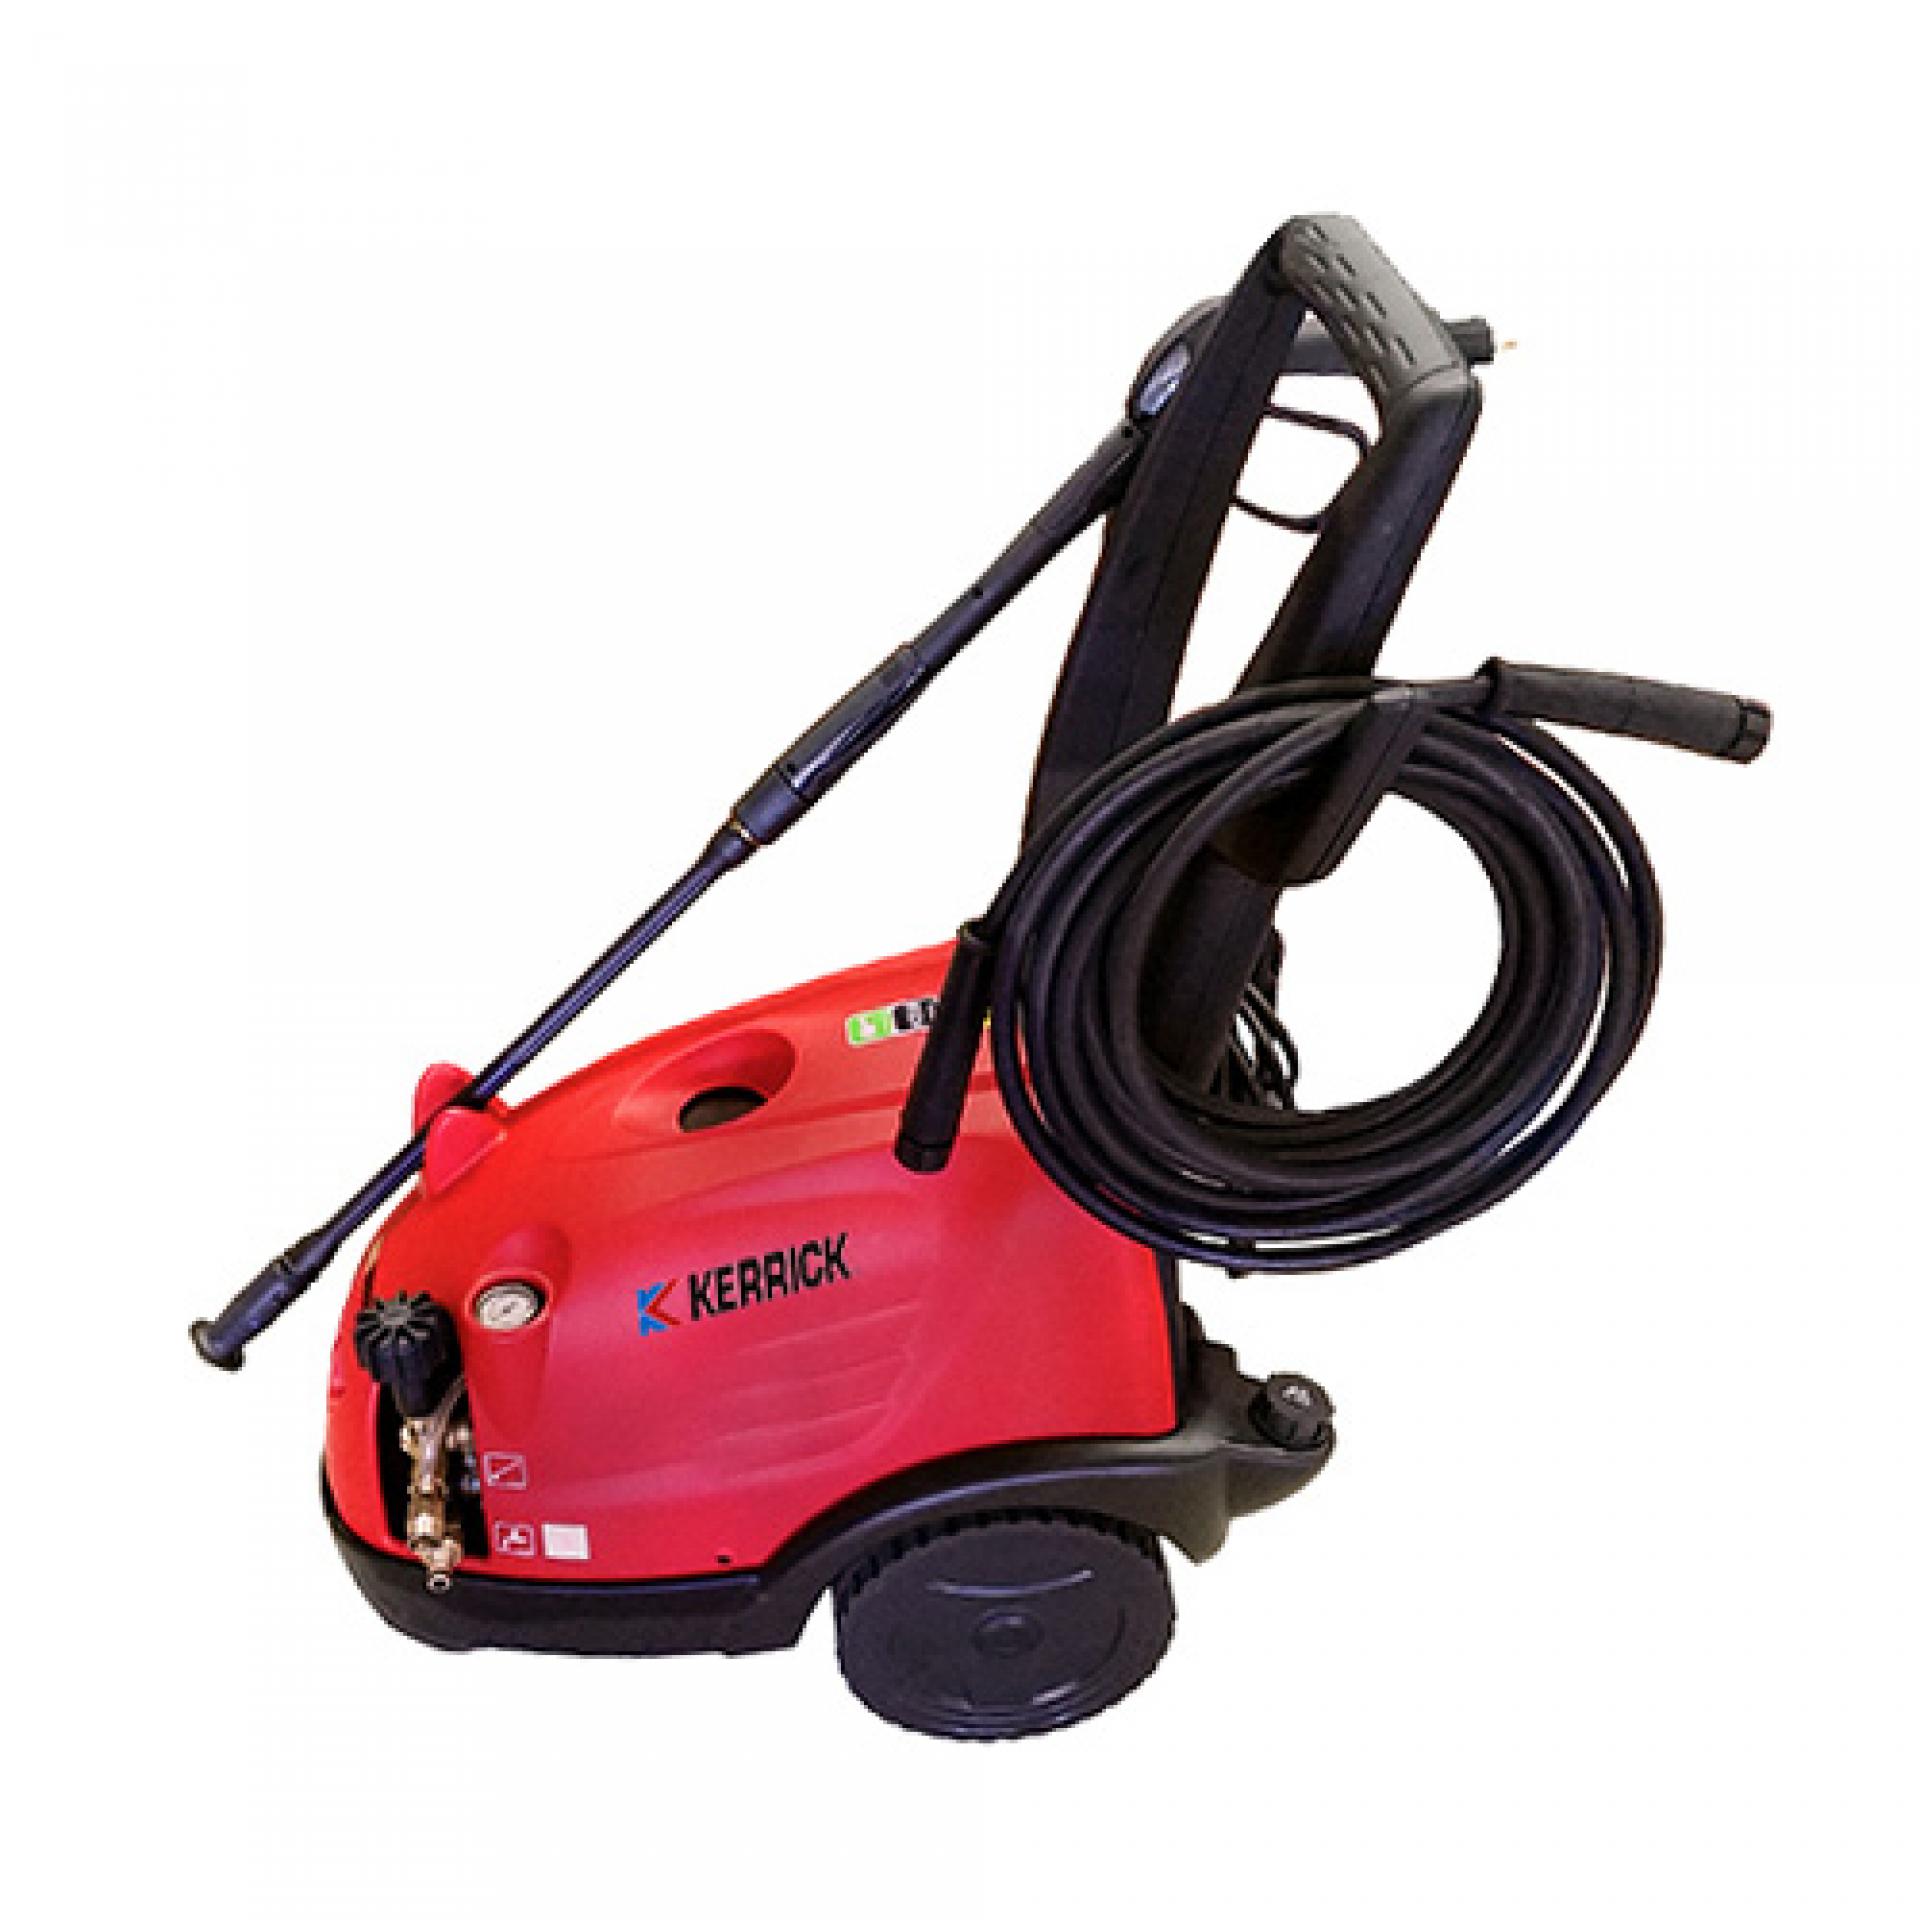 Elite Electric Pressure Washer Commercial Cleaning Supplies Auckland